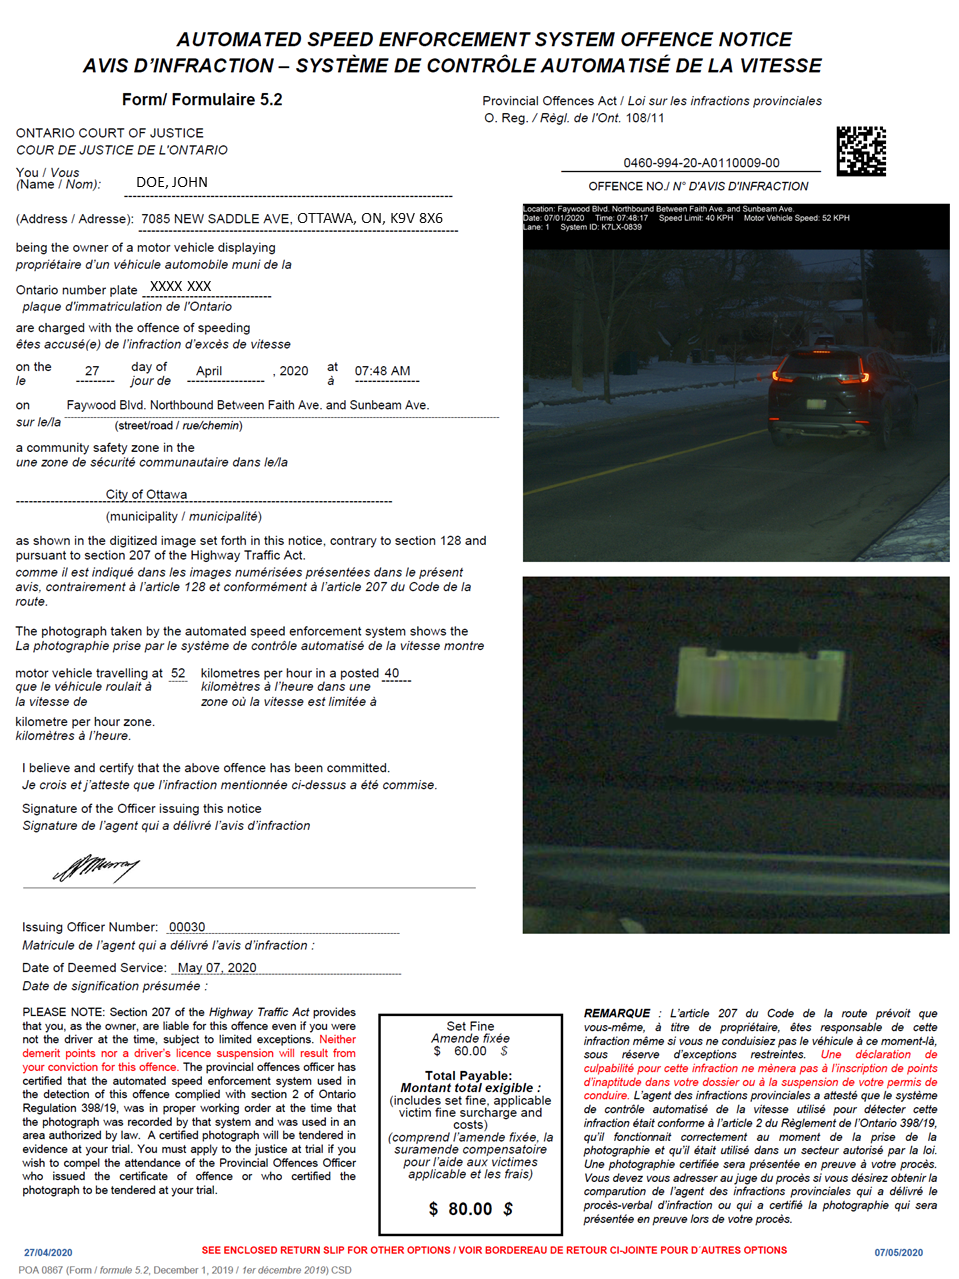 Automated Speed Enforcement – Electronic Ticket